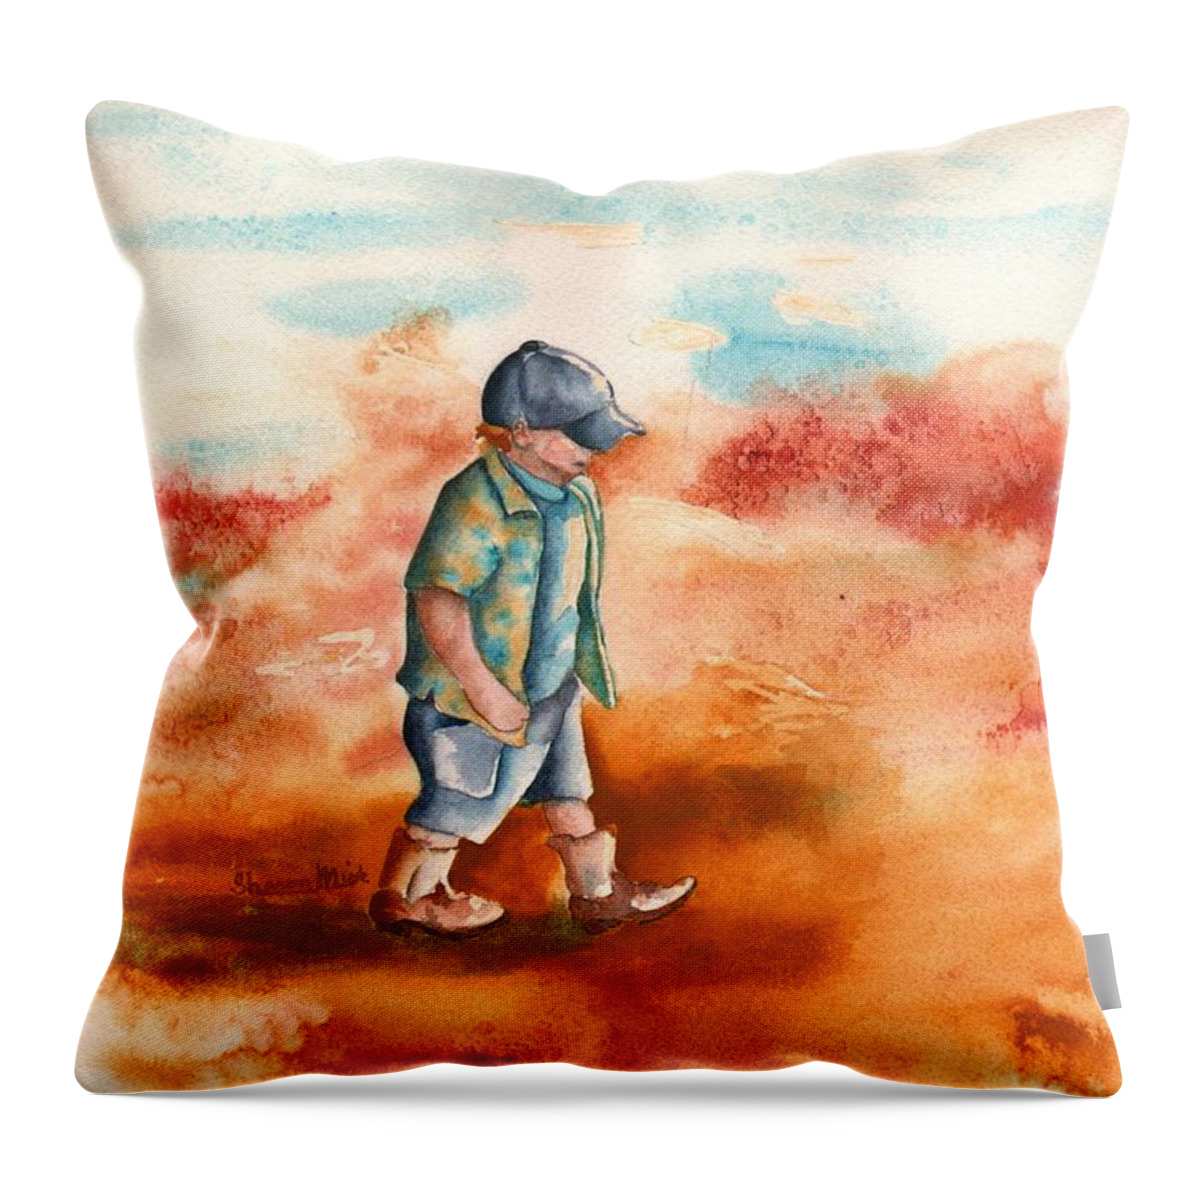 Chayton's Boots Throw Pillow featuring the painting Chayton's Boots by Sharon Mick